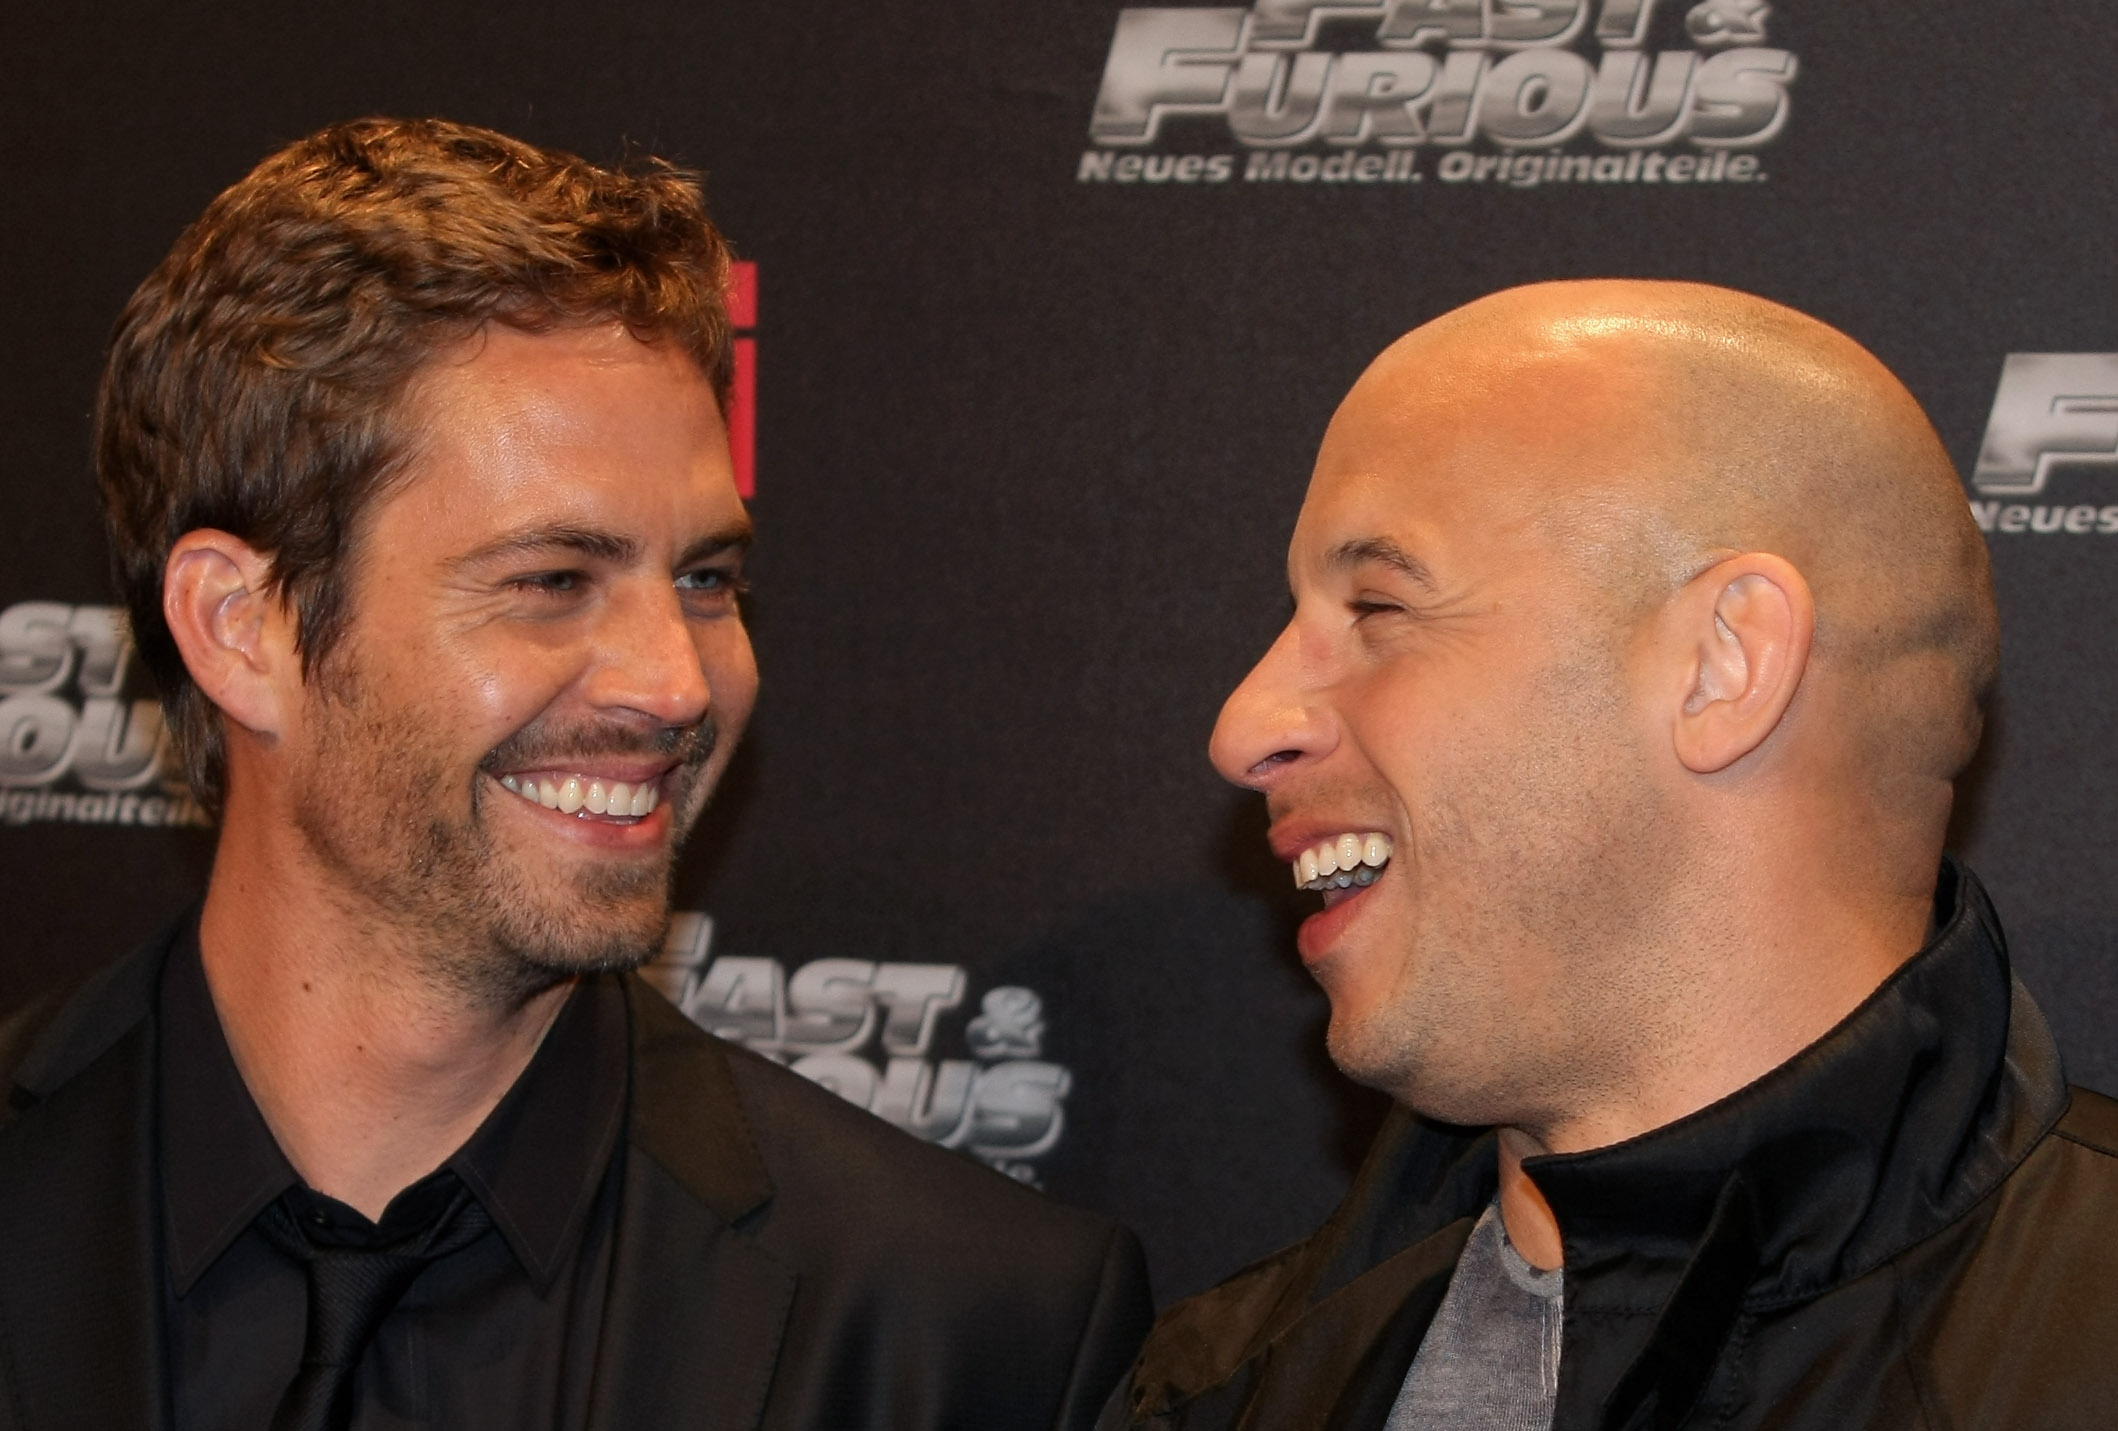 Paul Walker (L) and Vin Diesael arrive for the Europe premiere of Fast & Furious on March 17, 2009 in Bochum, Germany | Source: Getty Images